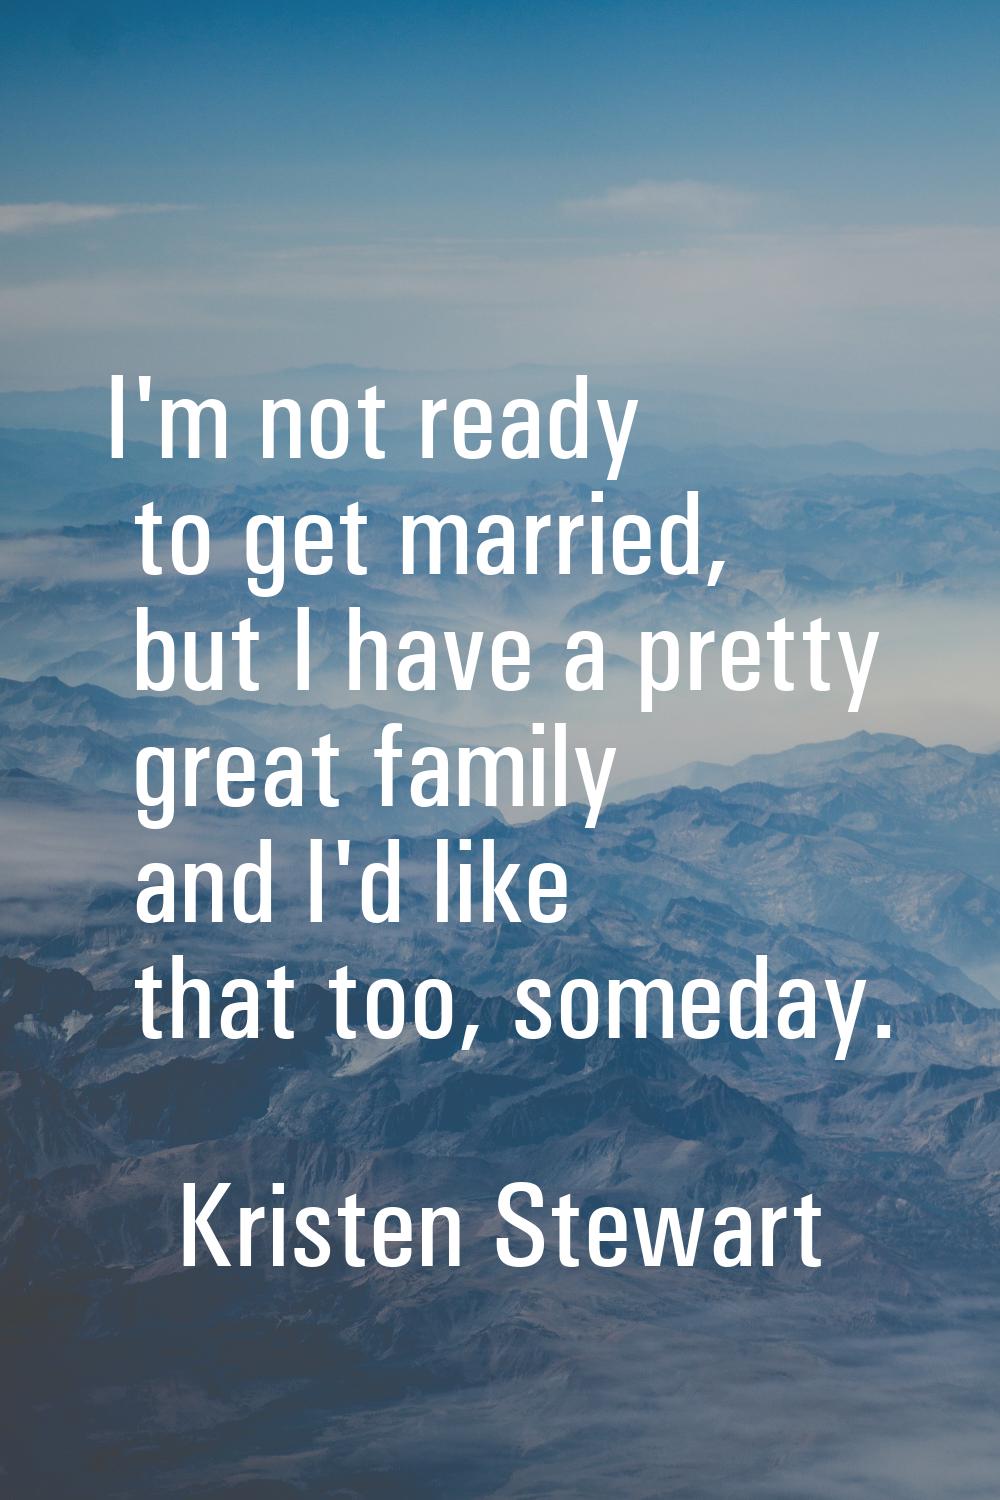 I'm not ready to get married, but I have a pretty great family and I'd like that too, someday.